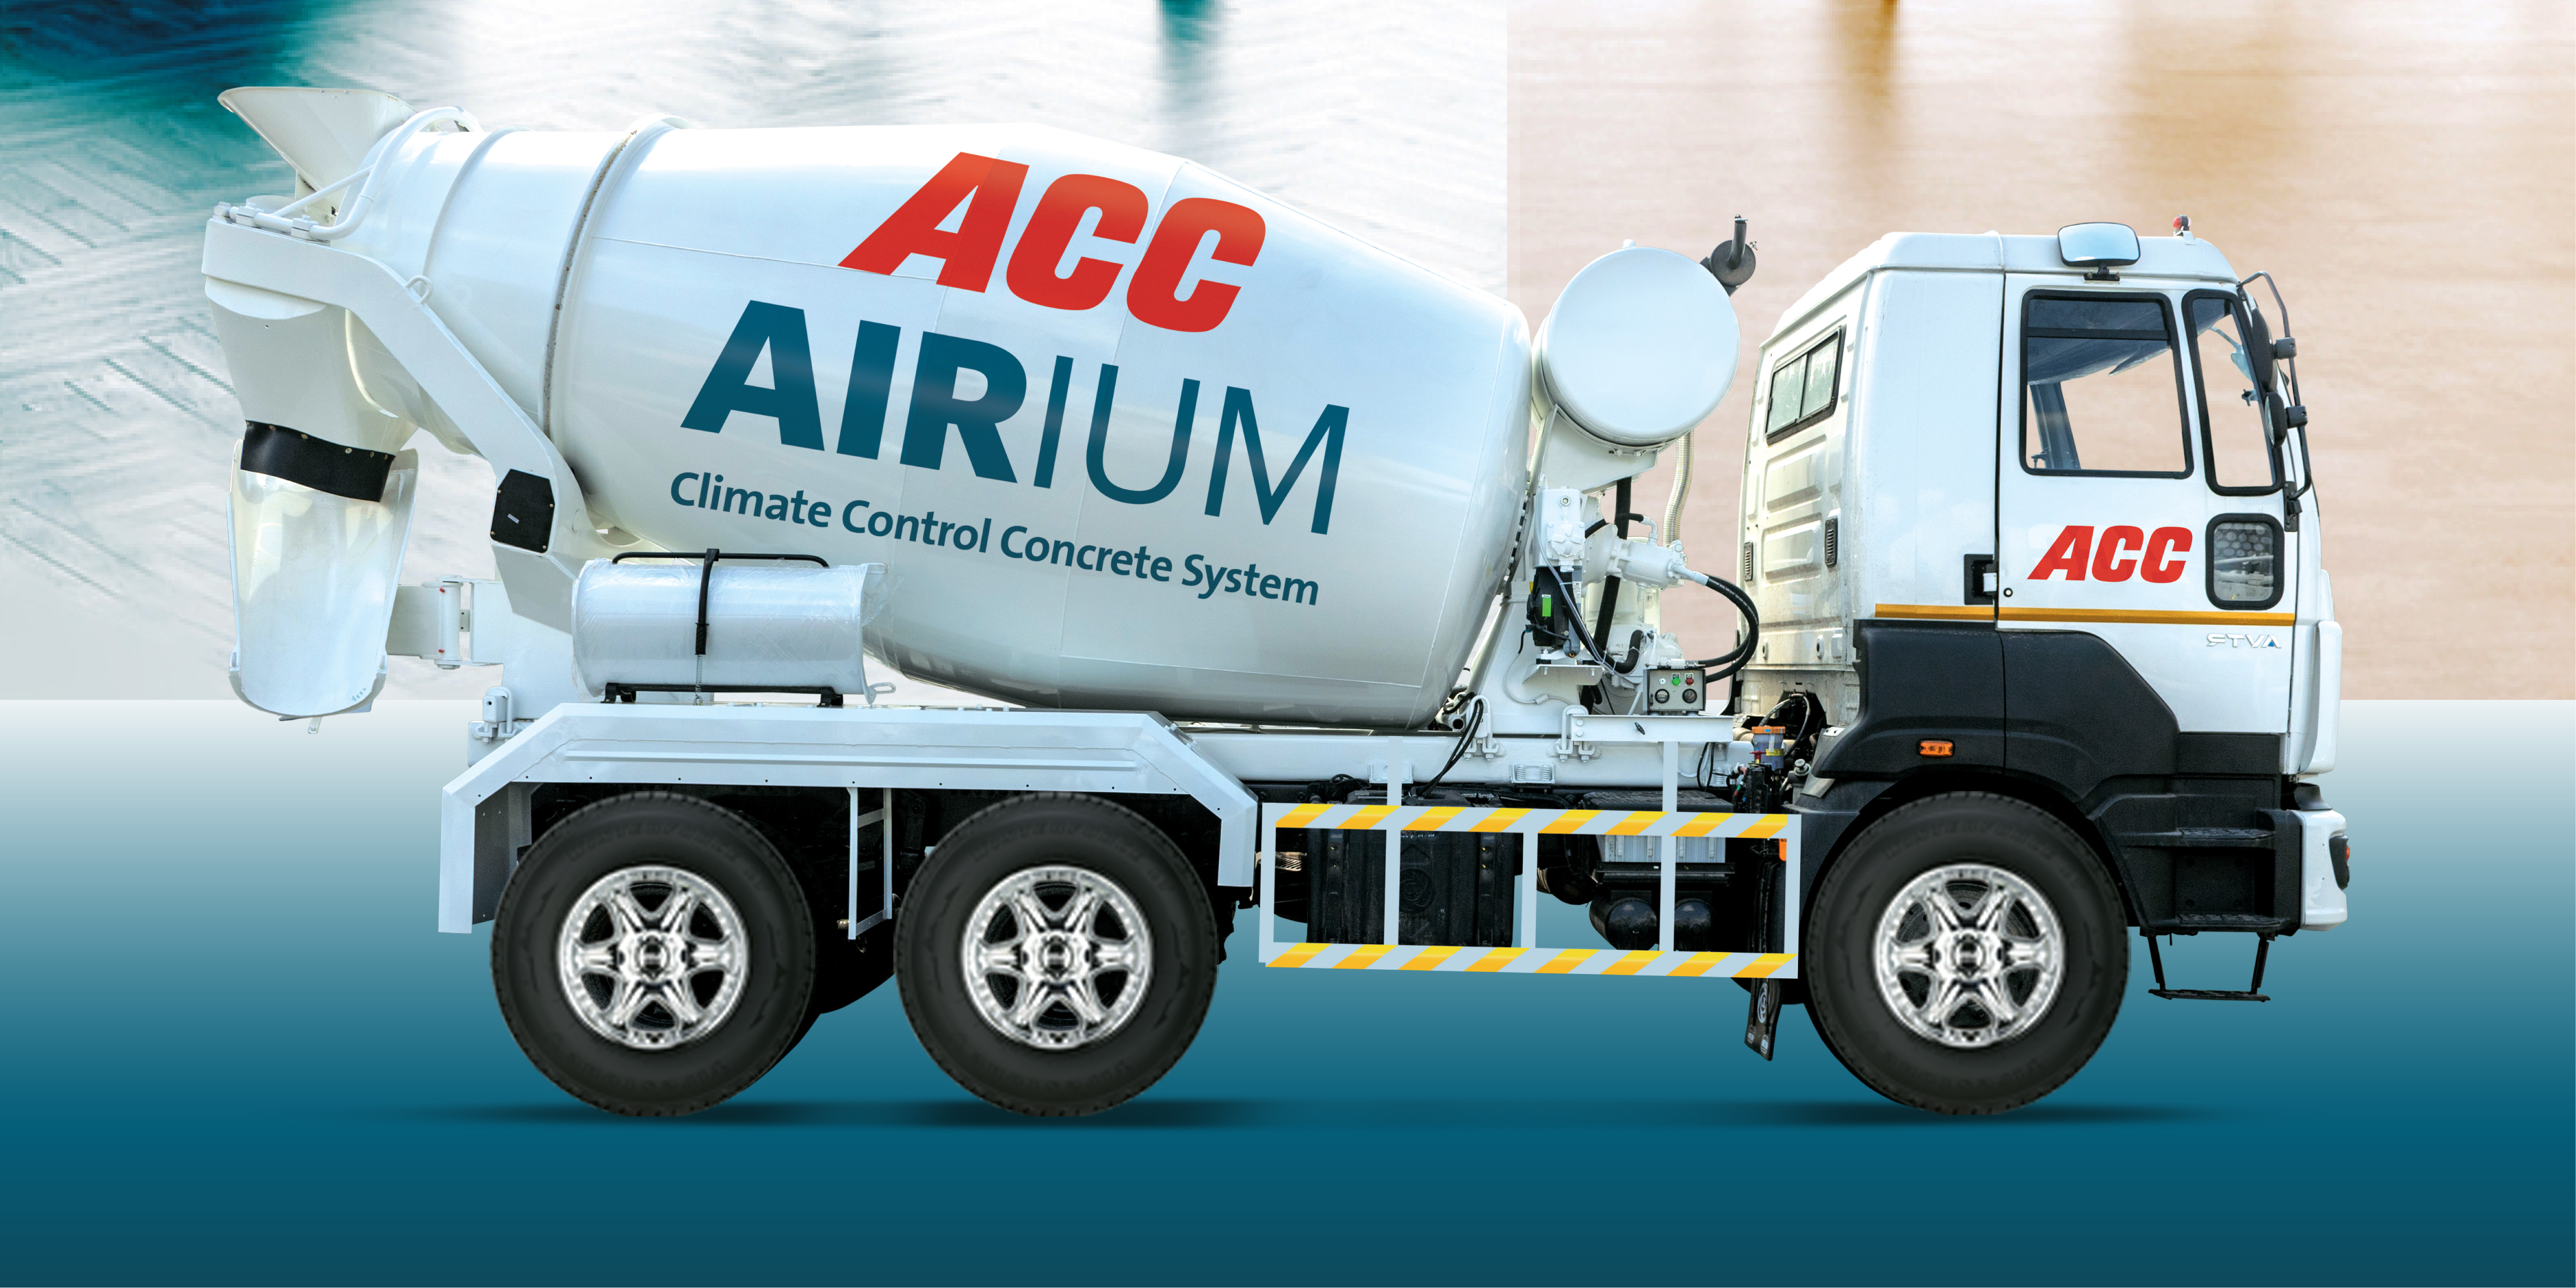 ACC Ltd launches ‘ACC Airium’, a revolutionary climate control concrete insulation system in India decoding=